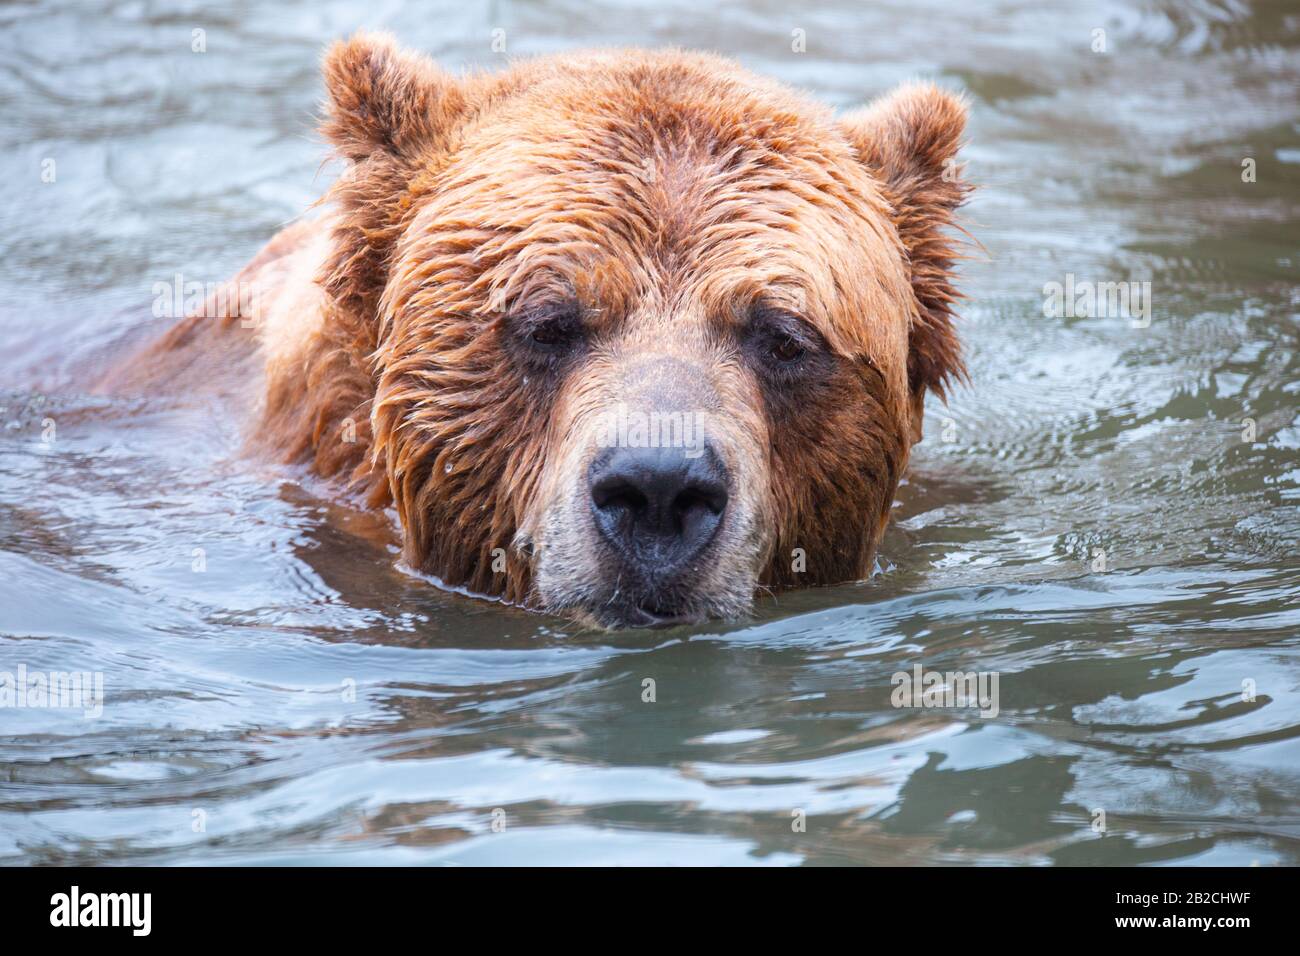 Grizzly Bear playing in the water surrounded by logs Stock Photo